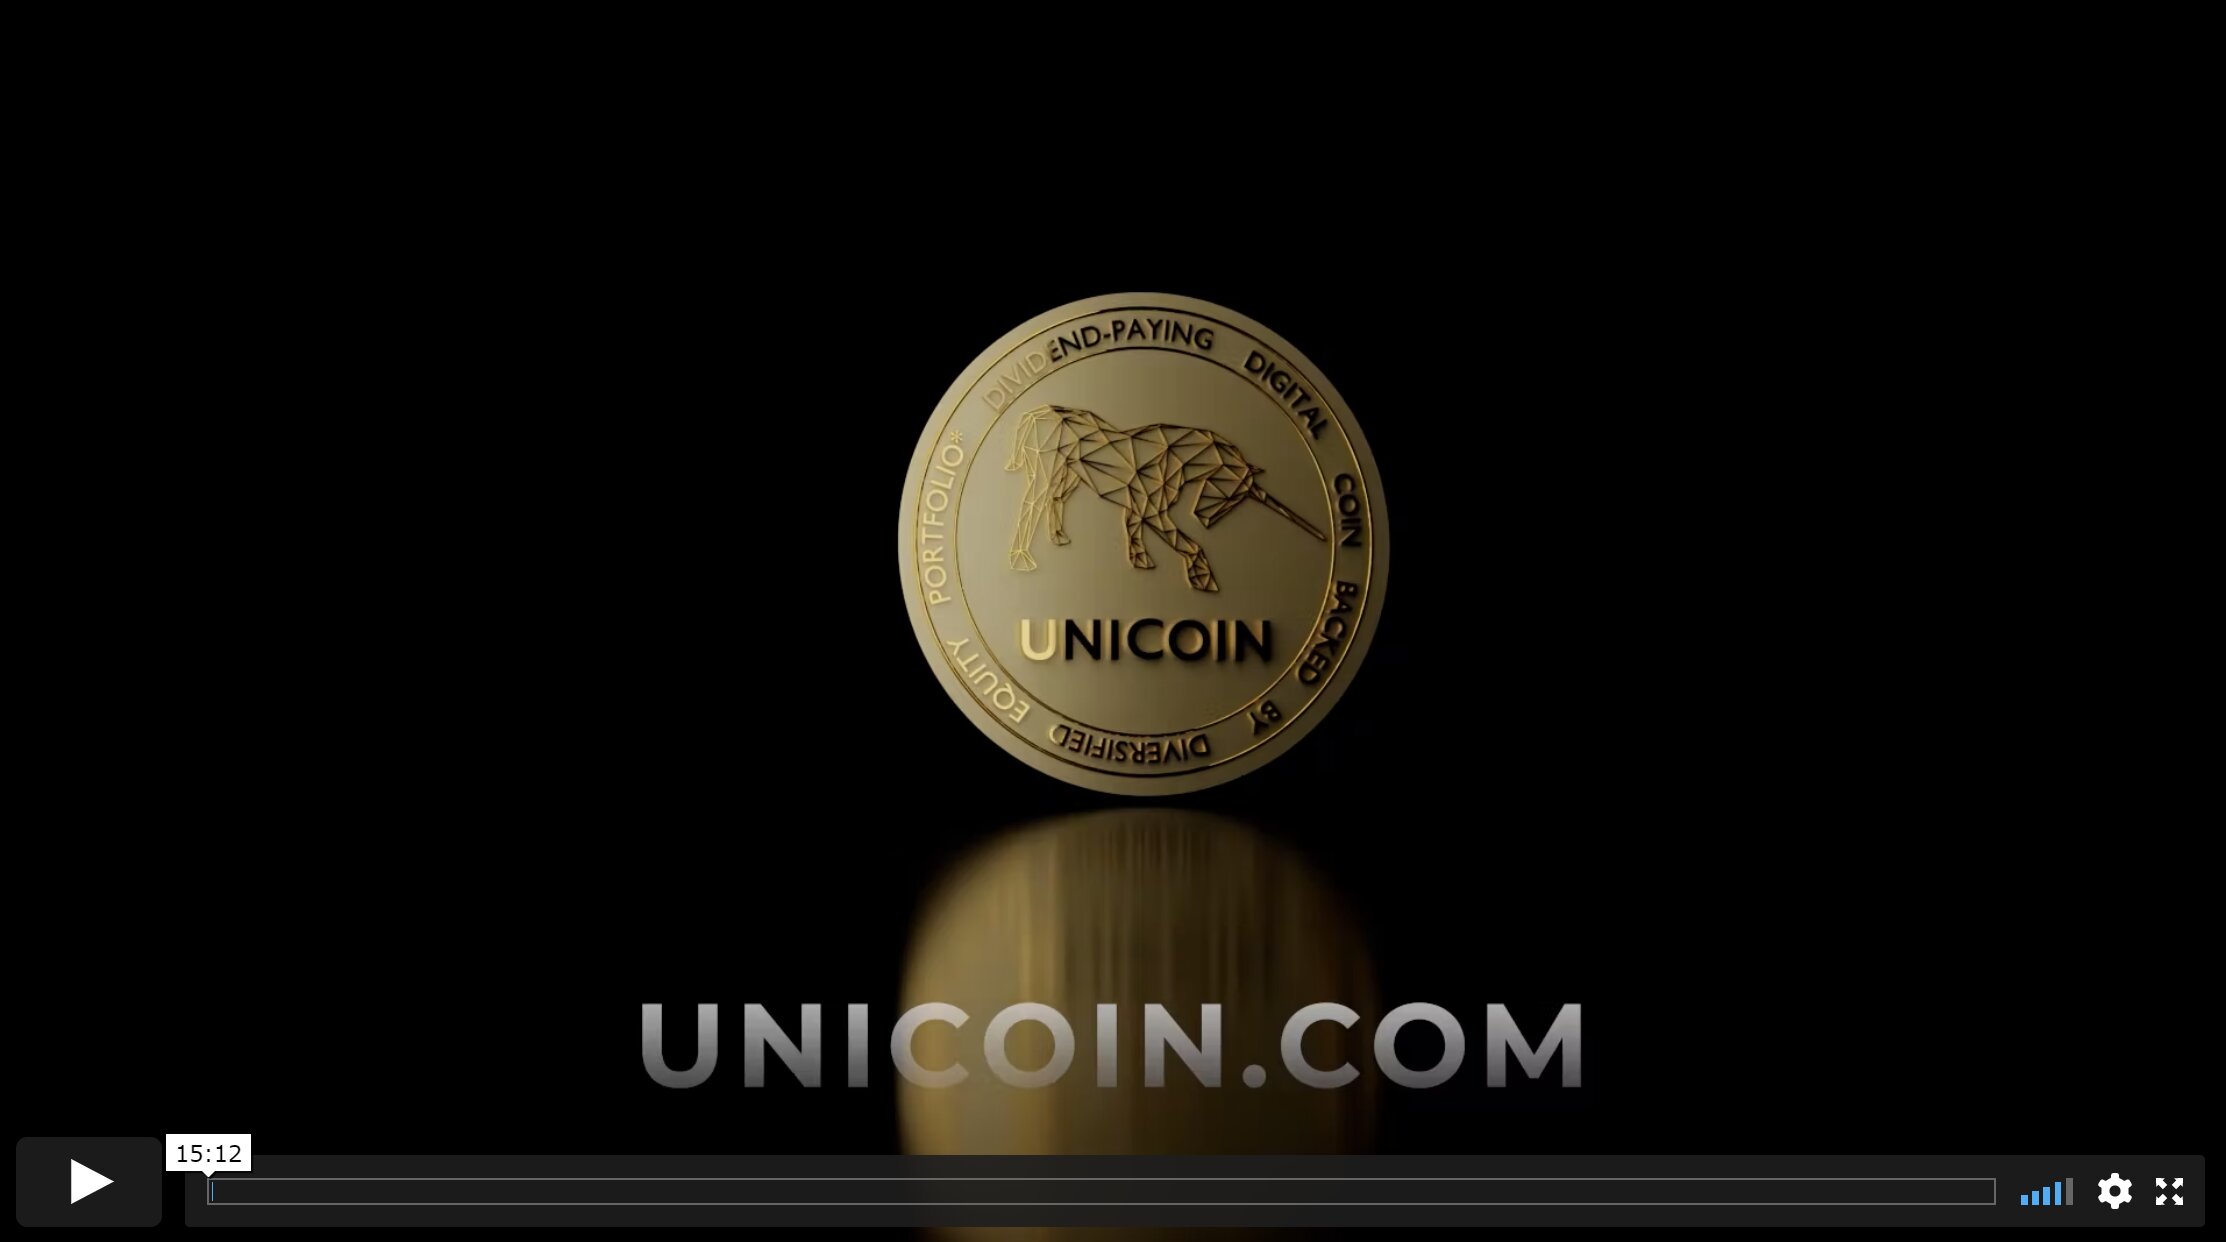 Unicoin - the Nature of the Opportunity